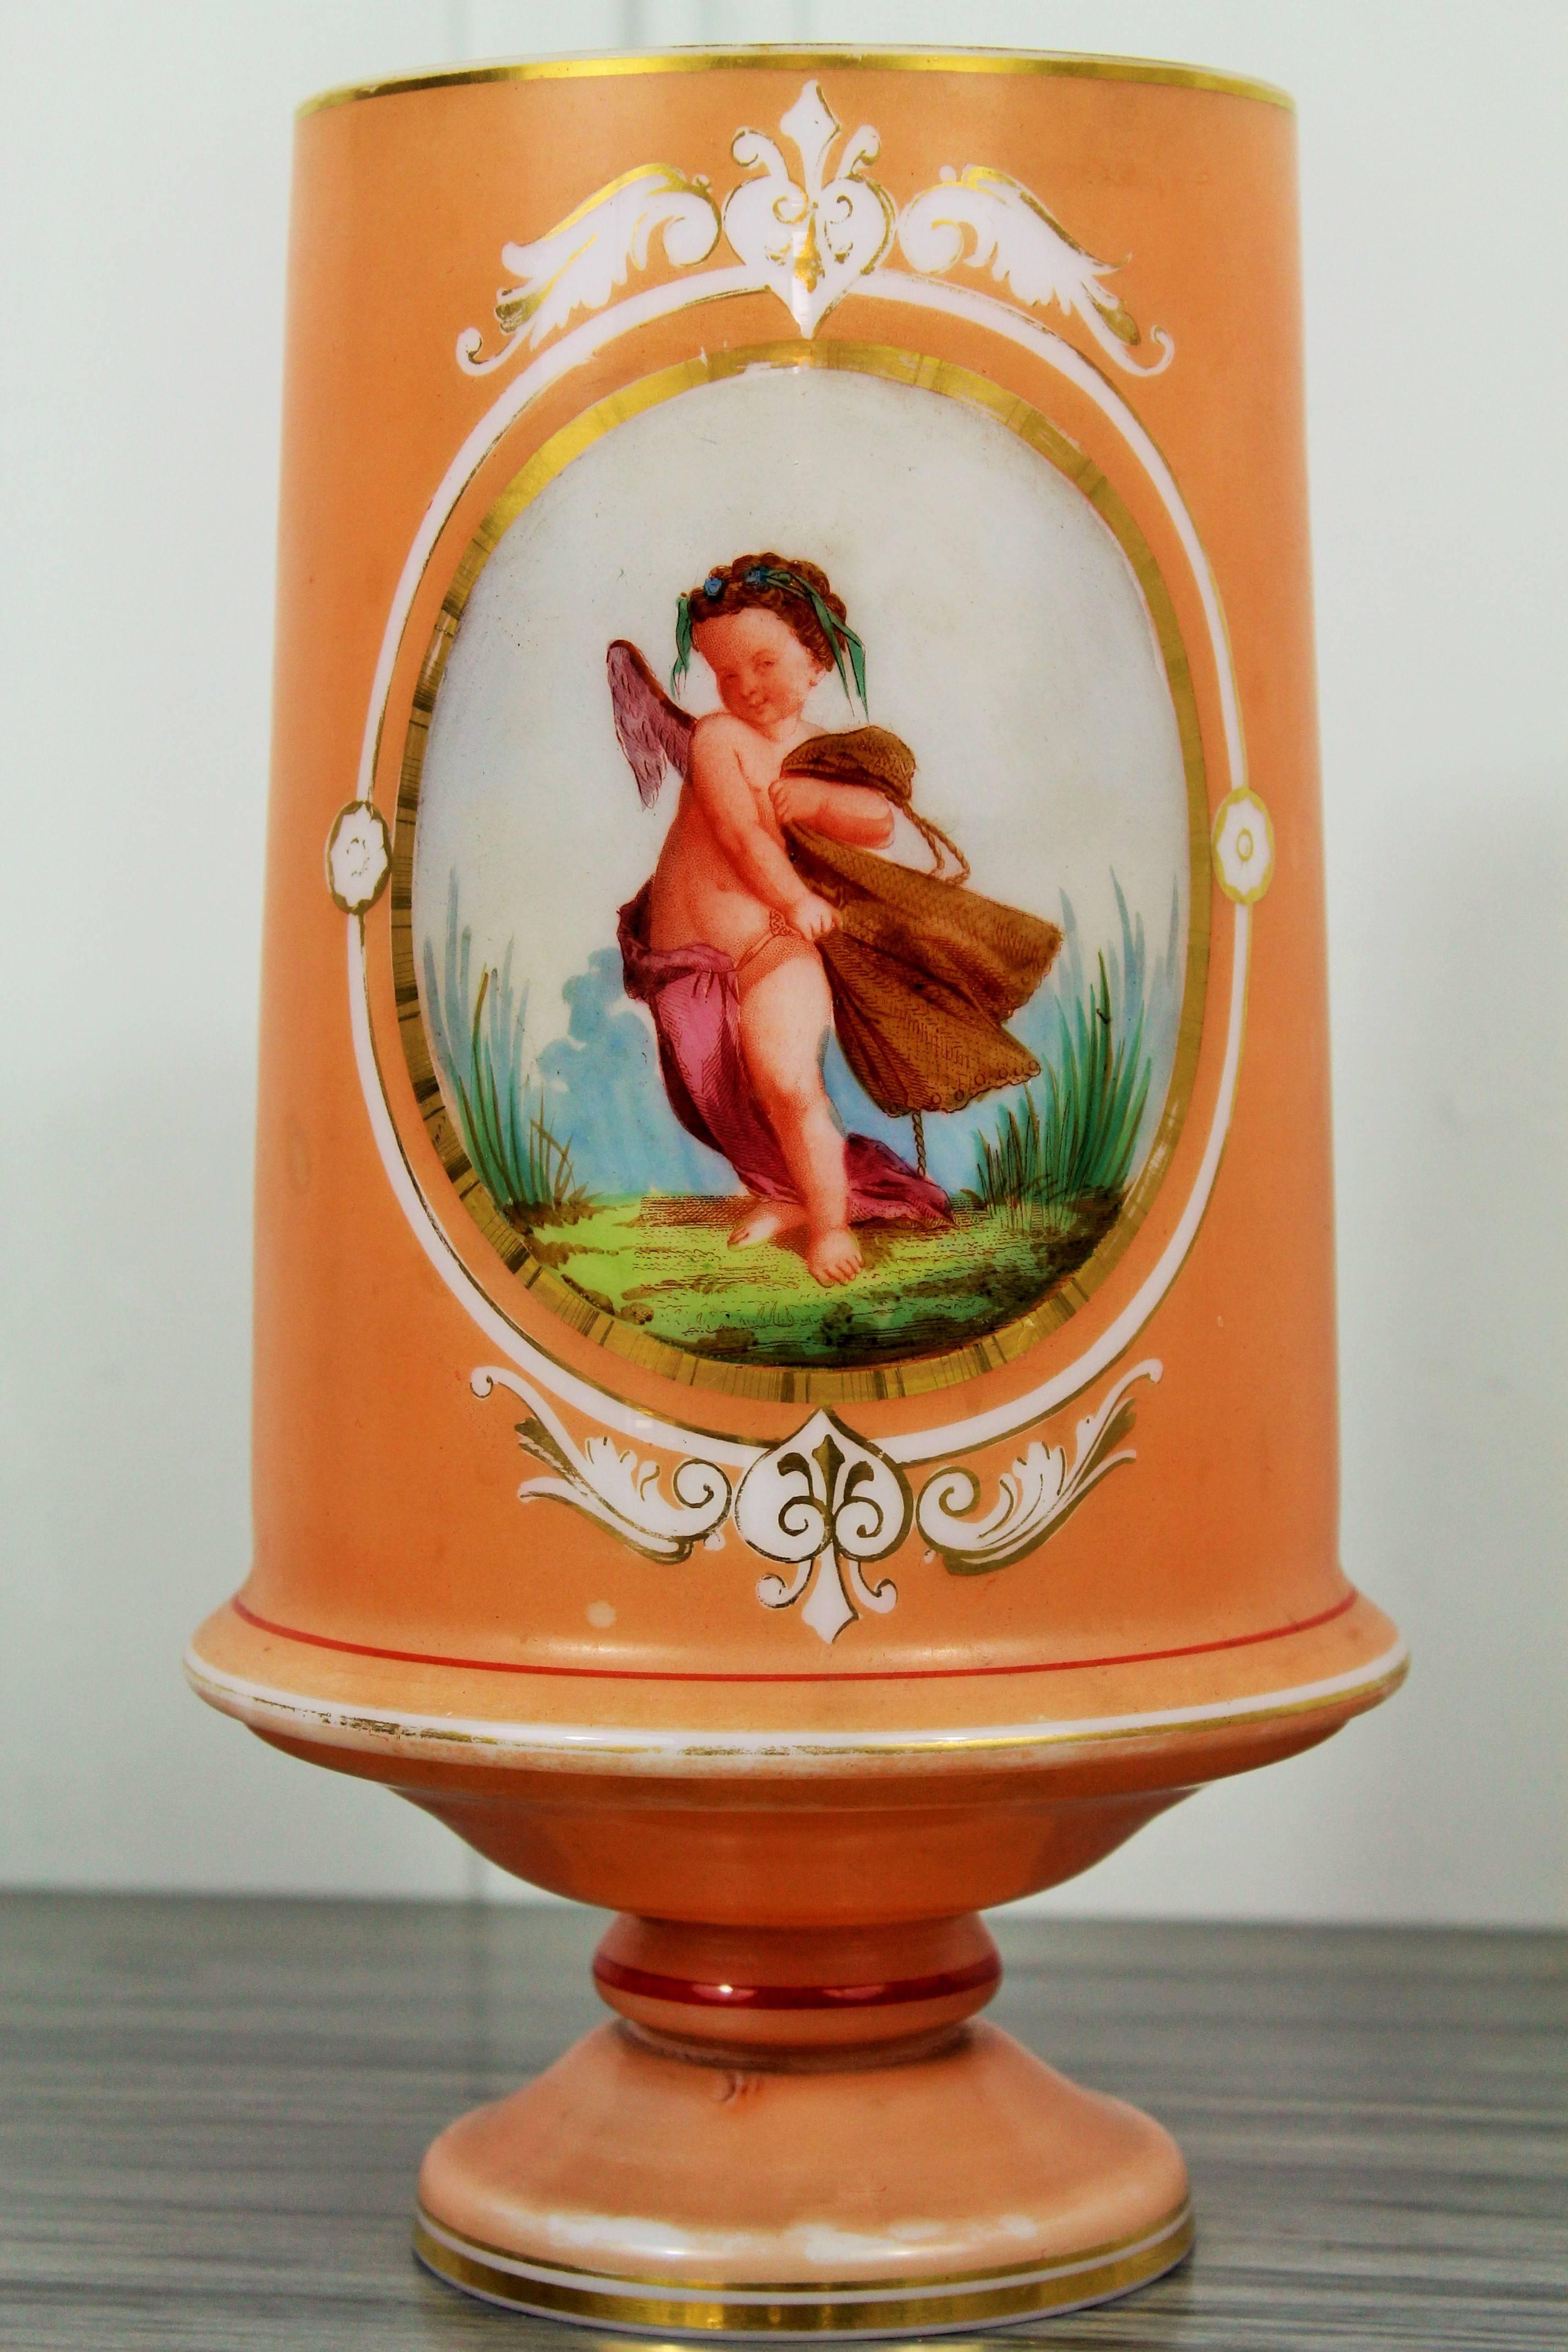 Charming vase on foot in opaline glass, painted and gilded.
A medallion is drawn in which is represented a cherub wearing a sheet. The pattern is very fine and delicate.
For an elegant and delicate interior decoration.
Ideal for flowers with large